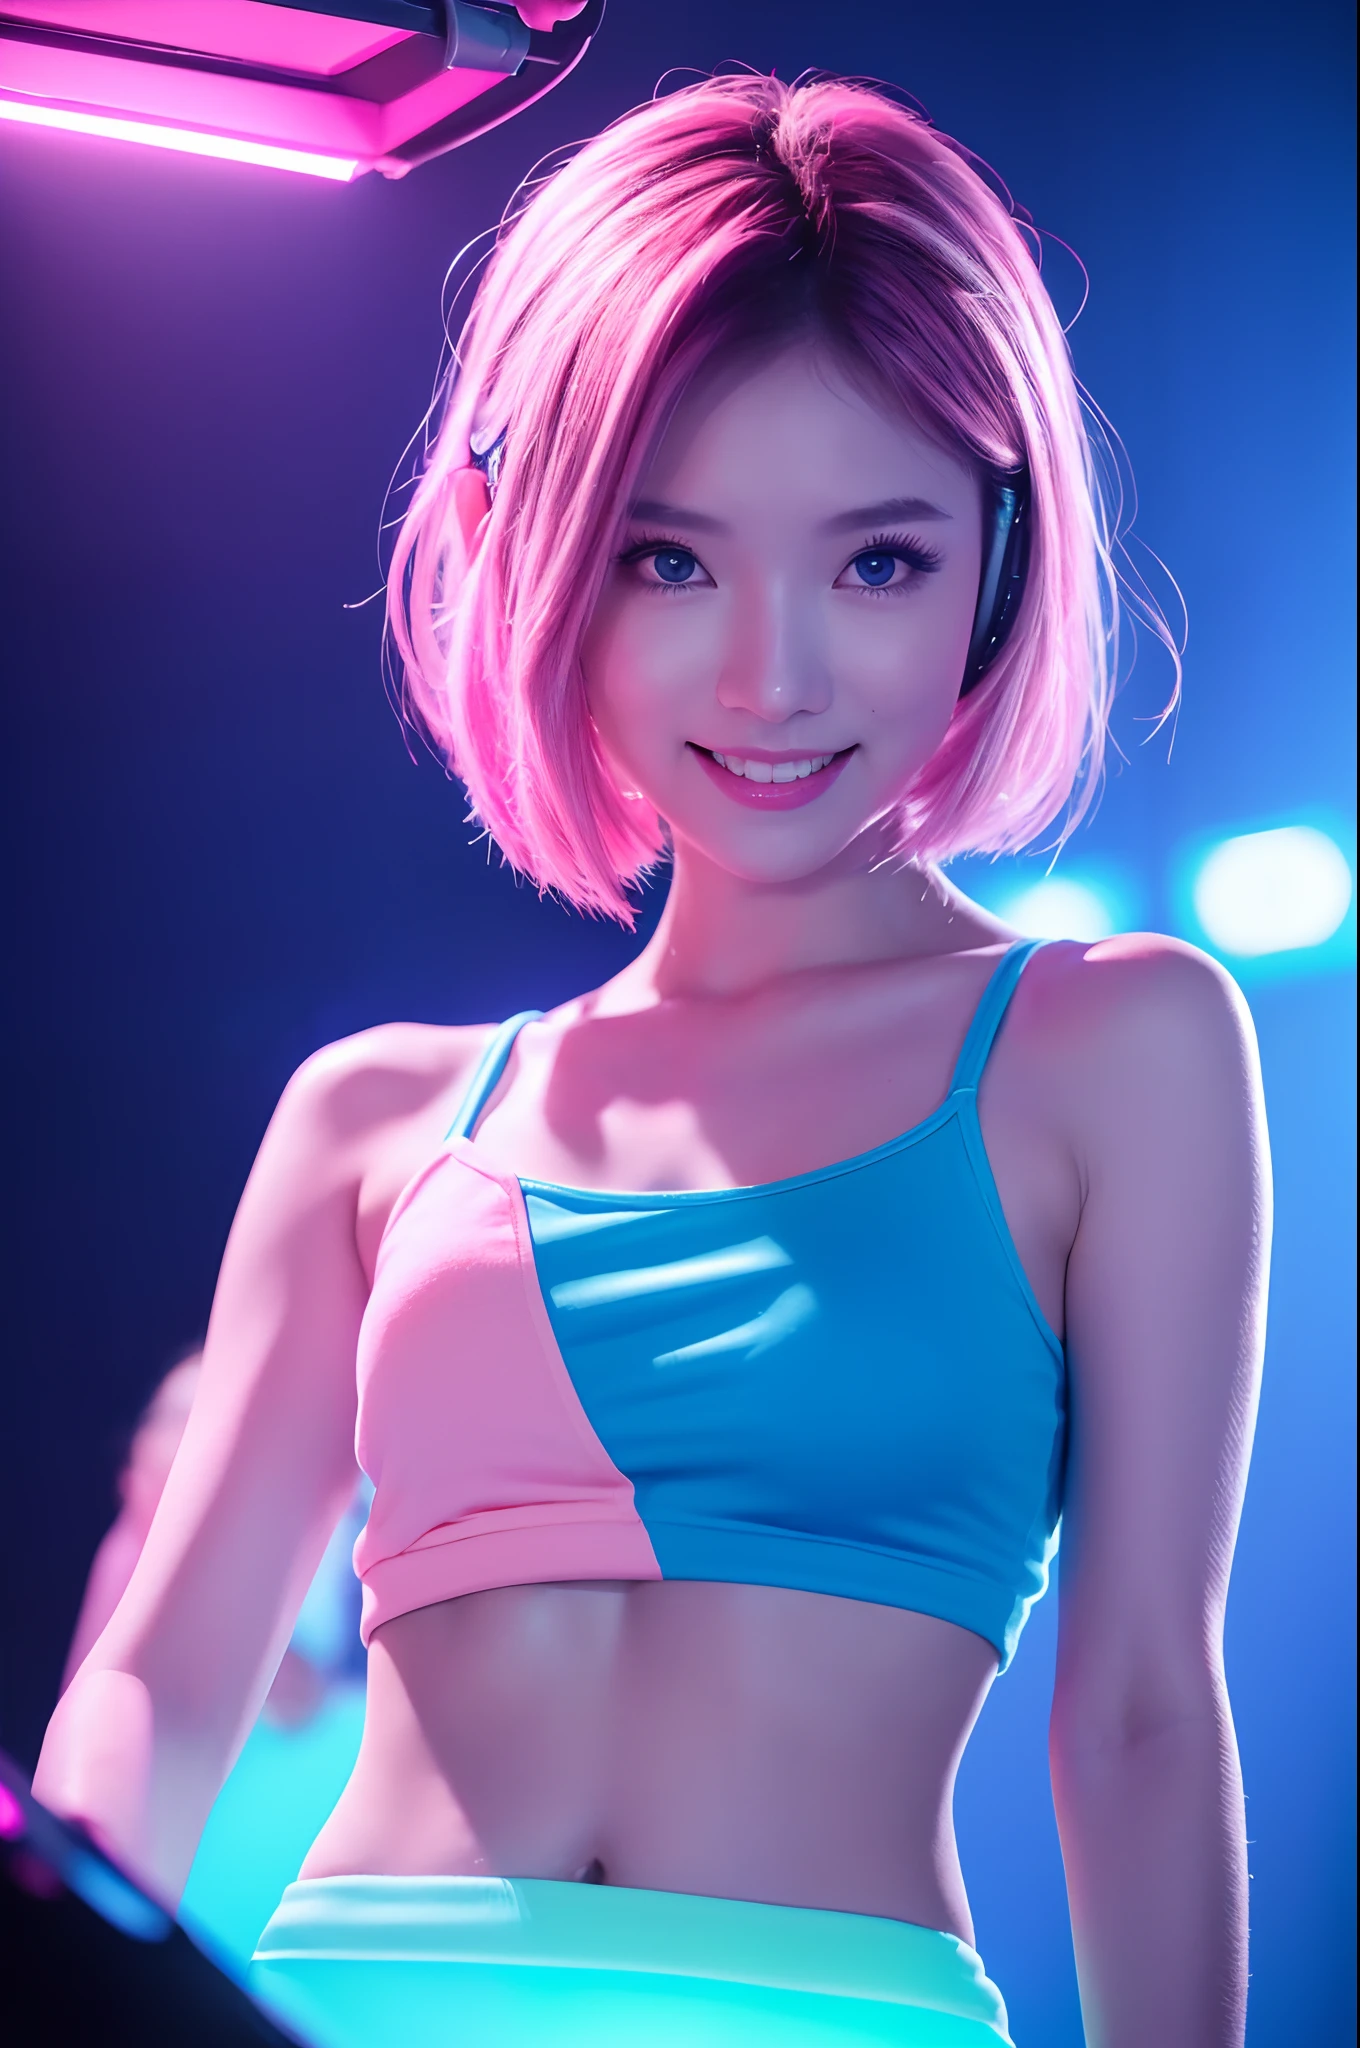 masterpiece, realistic,  a very sezy  girl with pink_headphones , short hair cool, (enjoy:1.6),(( happy eyes:1.4 )), light smile, in party, overall_happyness, dance, on in a dj booth with a mixer and a mixer board in front of her, Artgerm, toy, cyberpunk art, neogeo, ((( portrait rim light, pink, blue, ))),((( Main_lighting pink color))), (colorful:1.4), ultra sharp, ultra detail, high quality, 
lighting  dance, Lighting to Add Excitement , CHAUVET DJ LED Lighting, sharp shadow